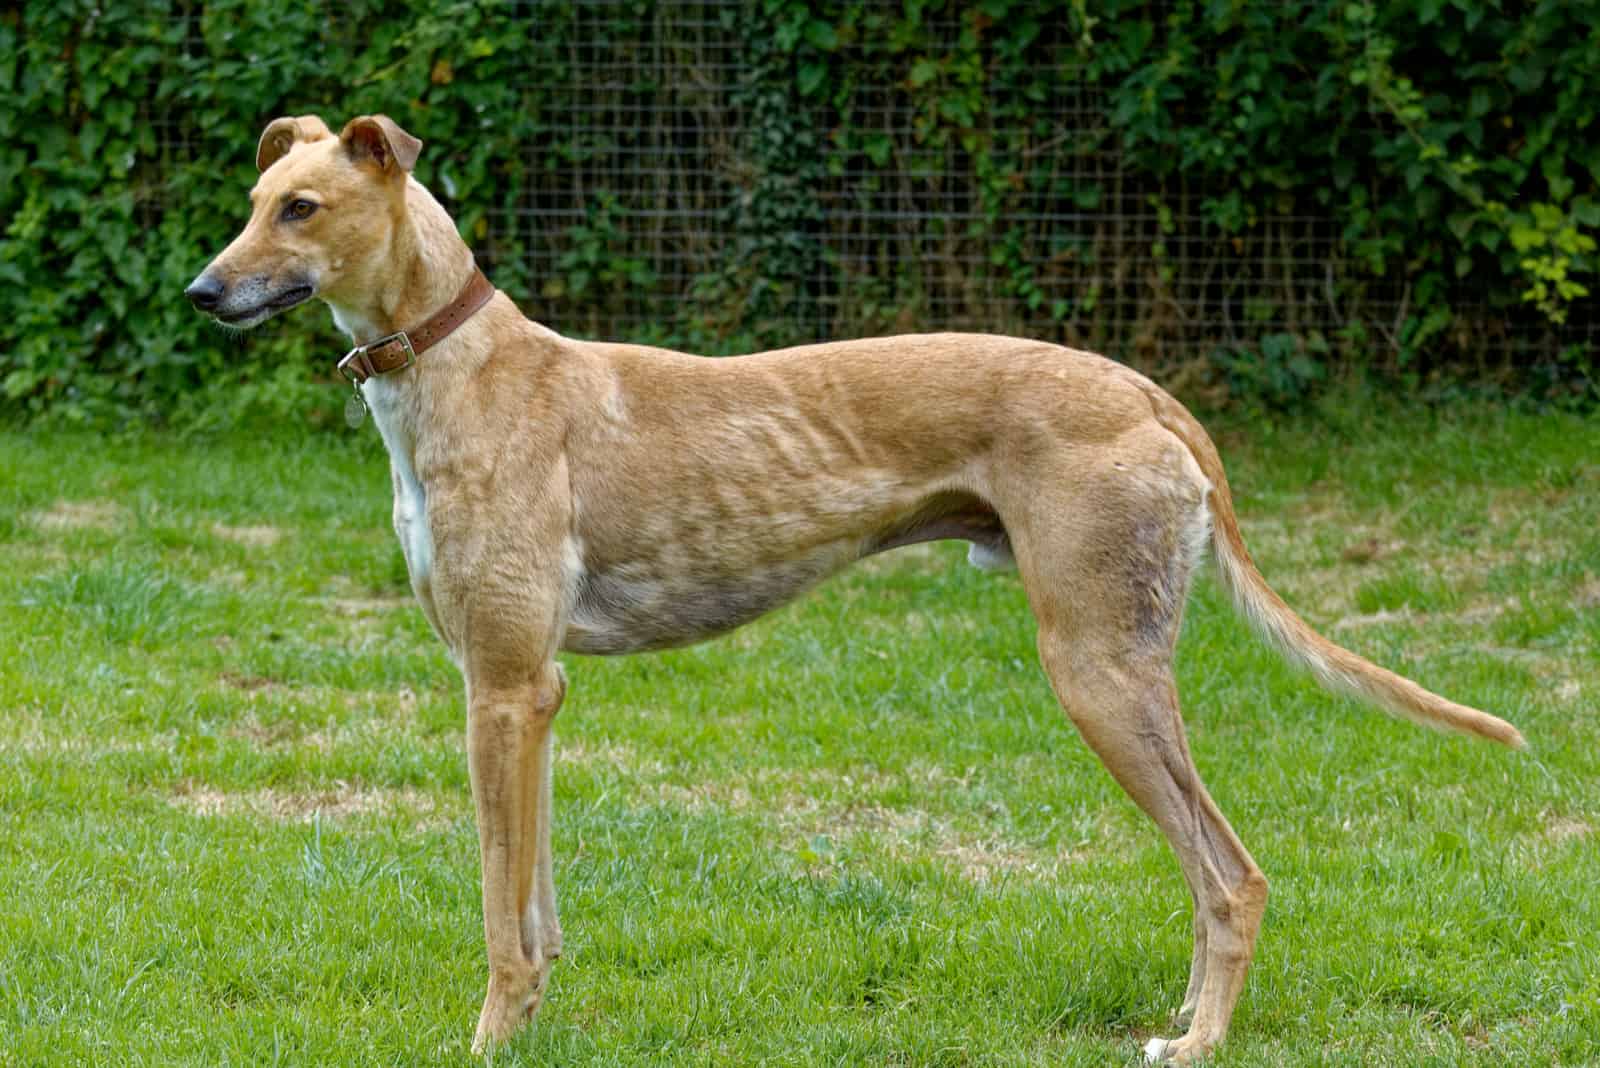 Fawn greyhound standing on the grass